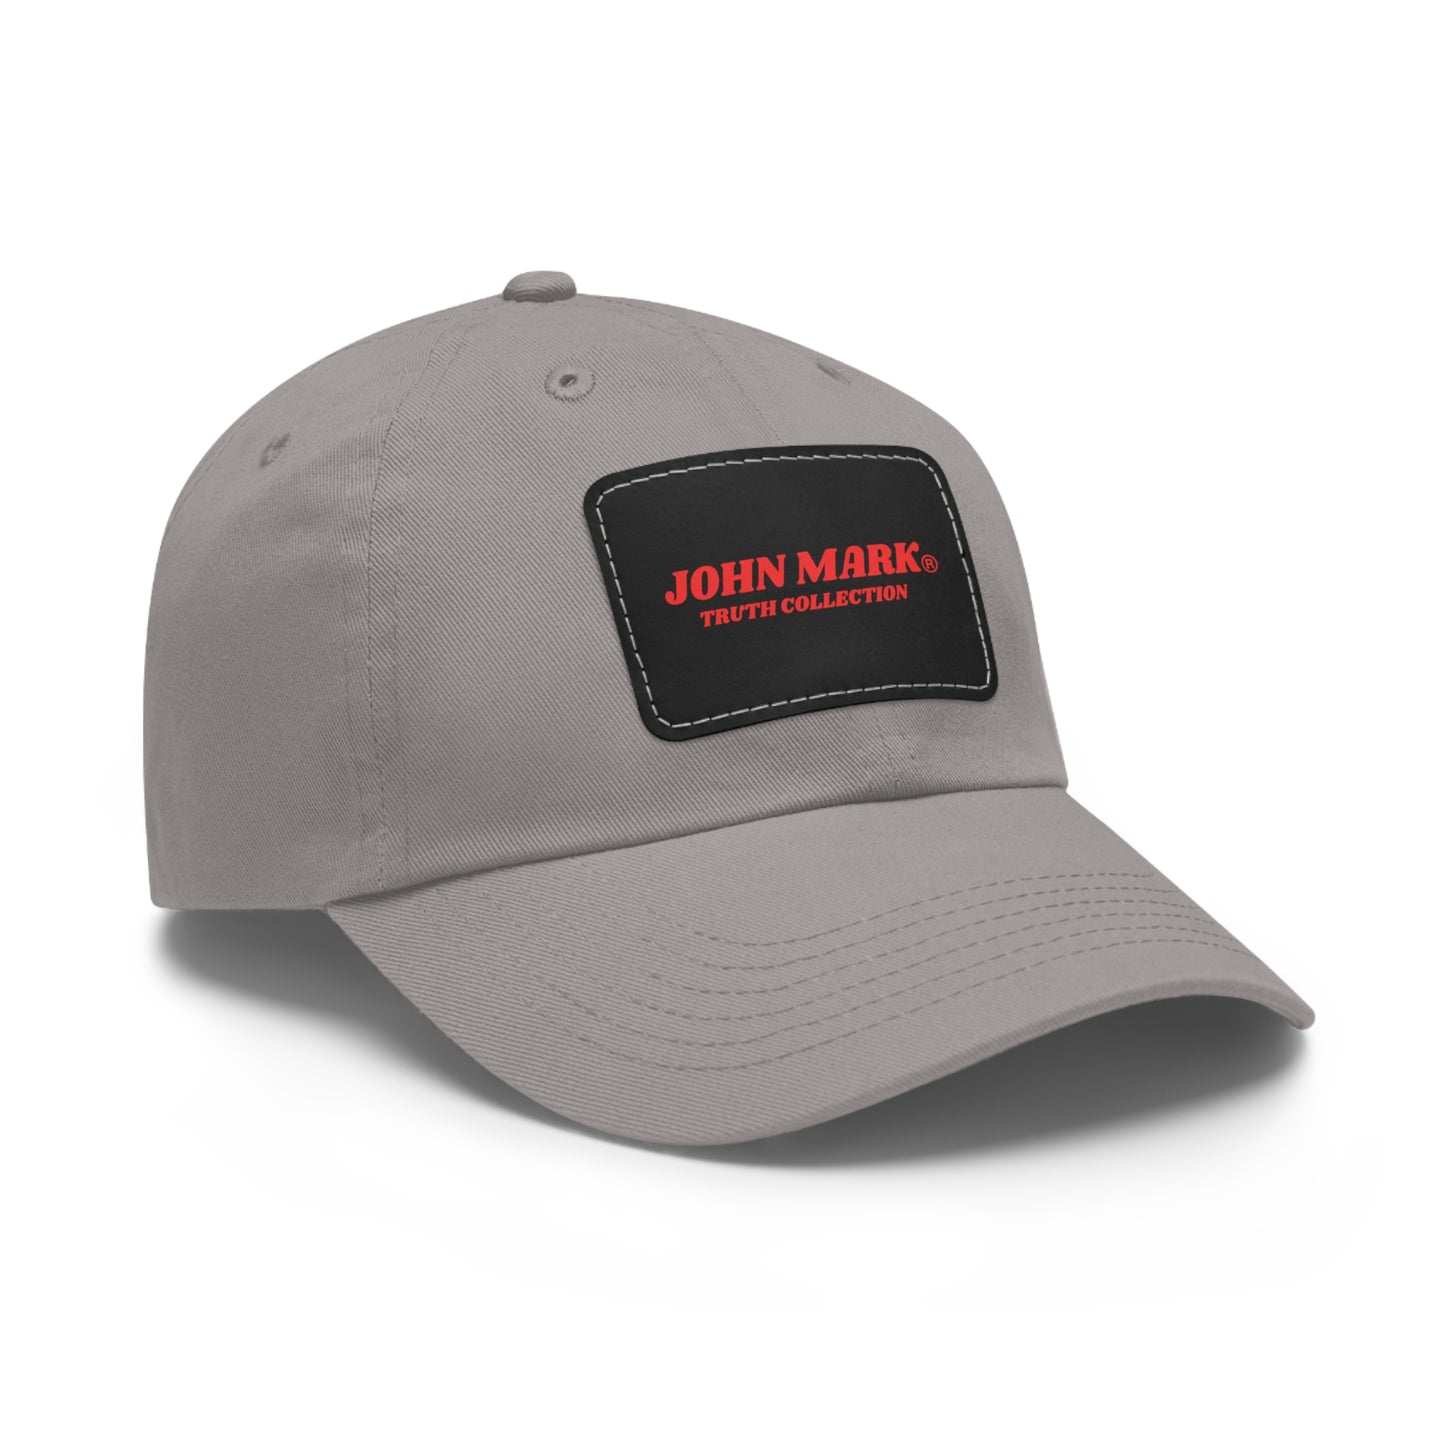 "JOHN MARK CLASSIC" Cap with Leather Patch